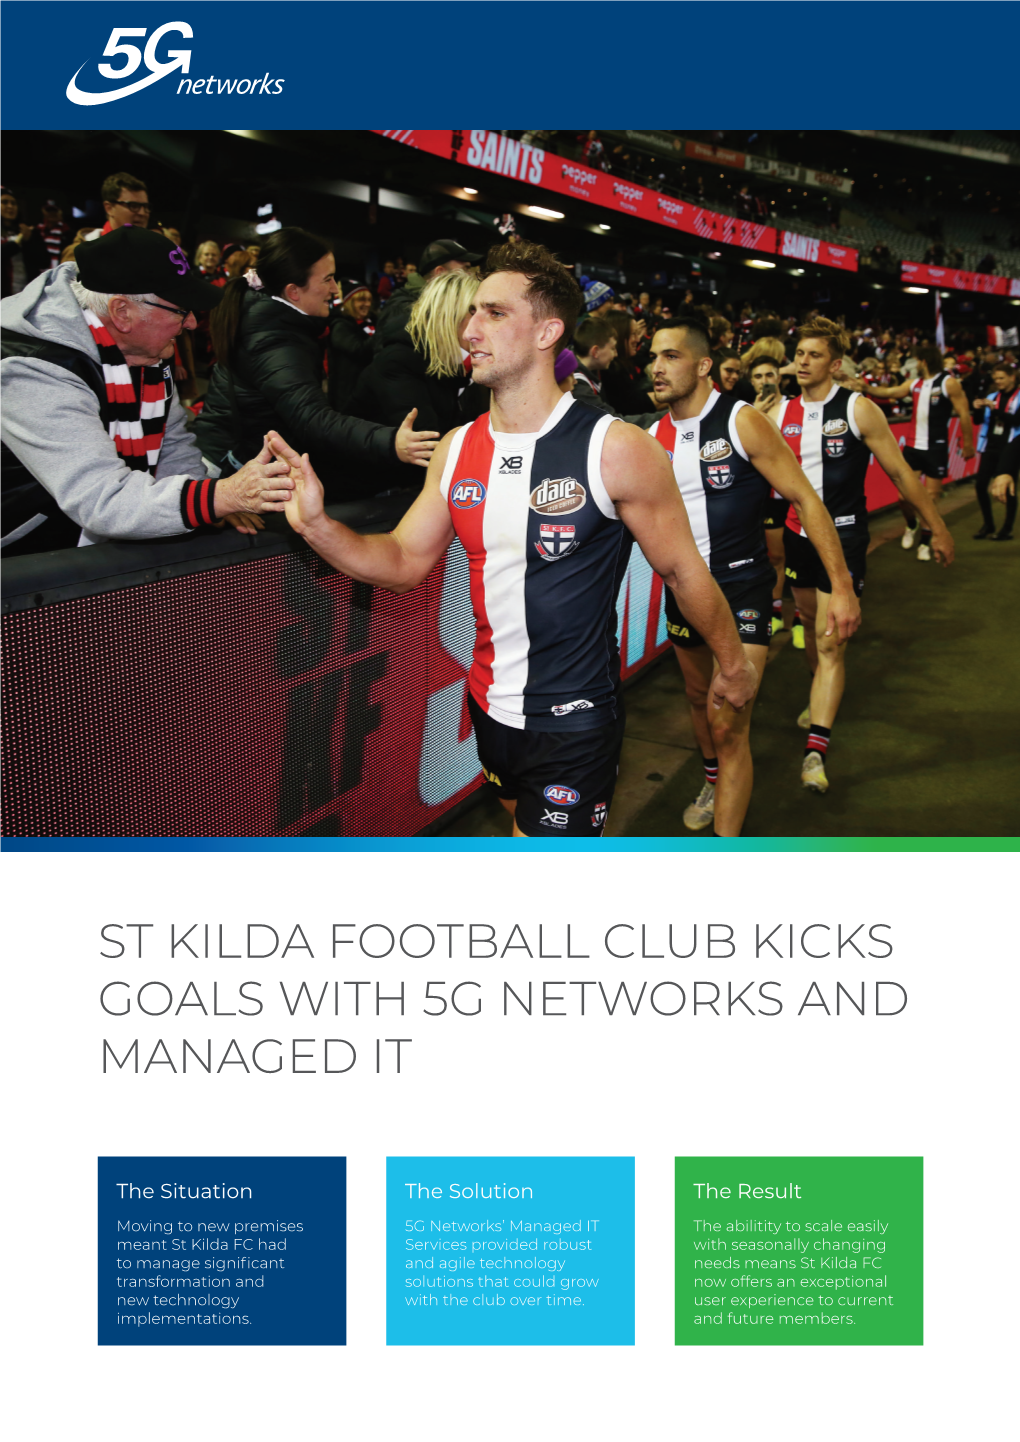 St Kilda Football Club Kicks Goals with 5G Networks and Managed It